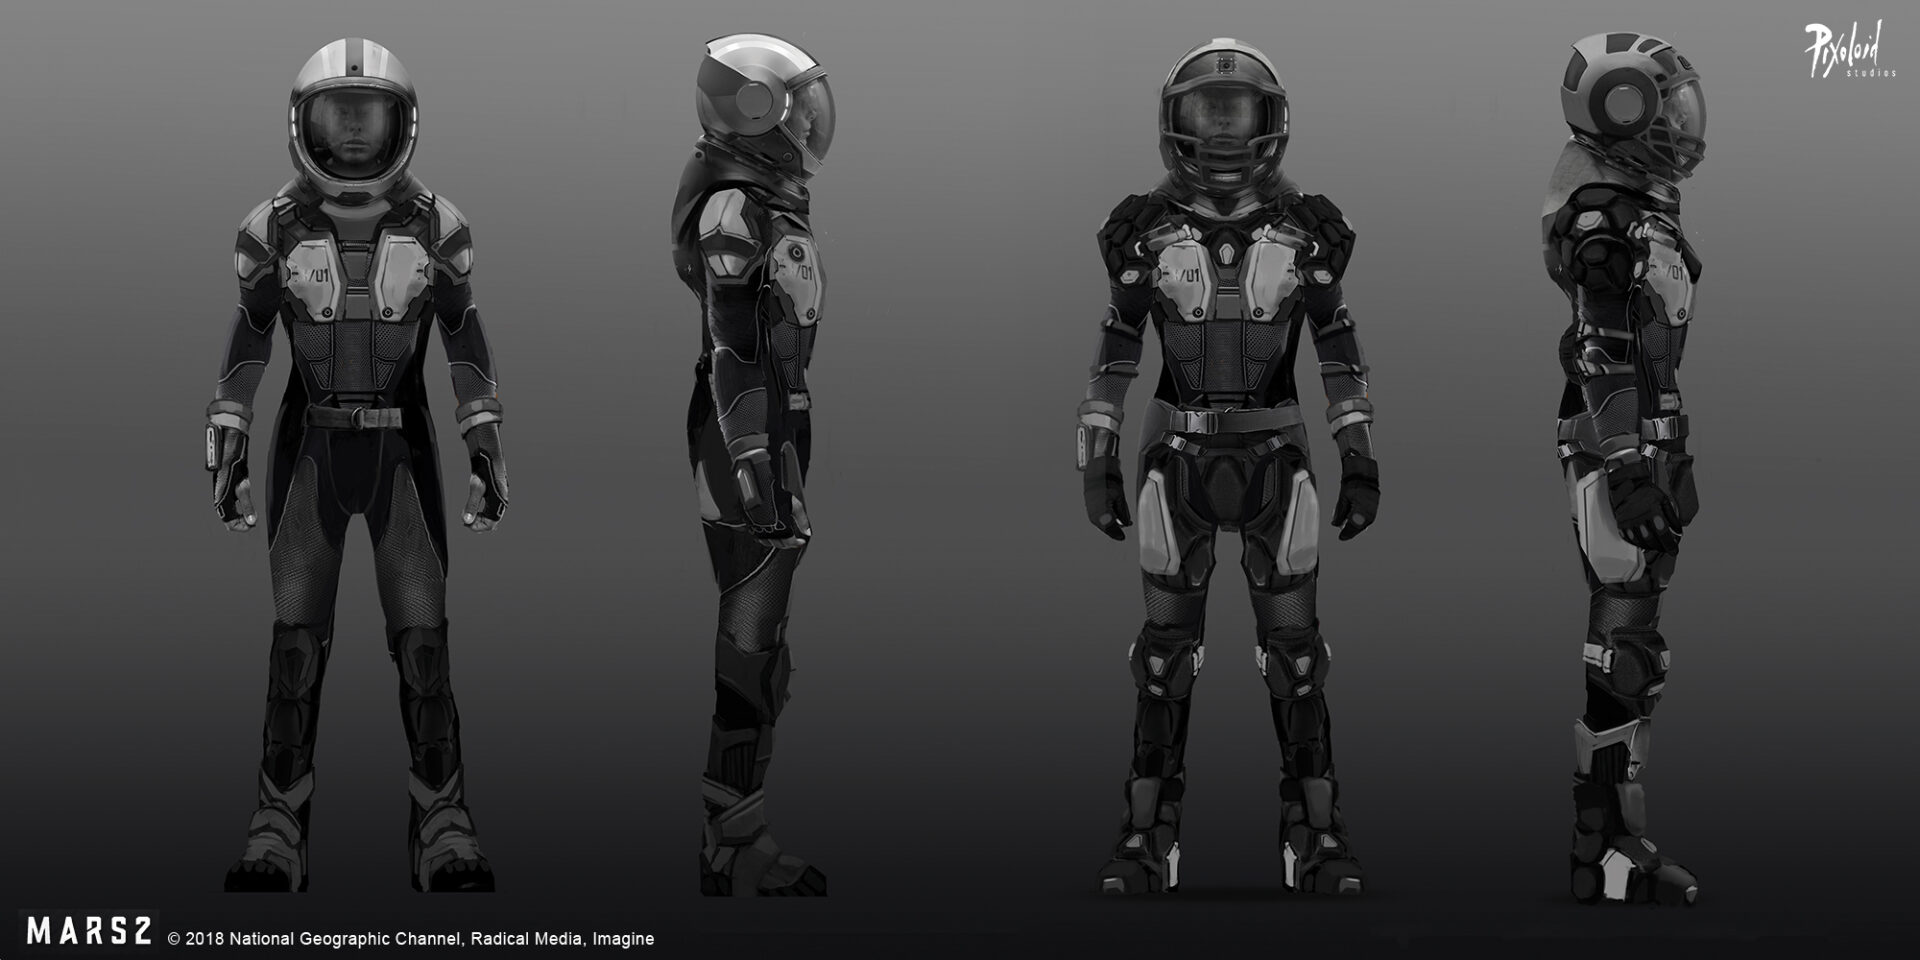 Space suit / costume design for MARS season 2 / National Geographic